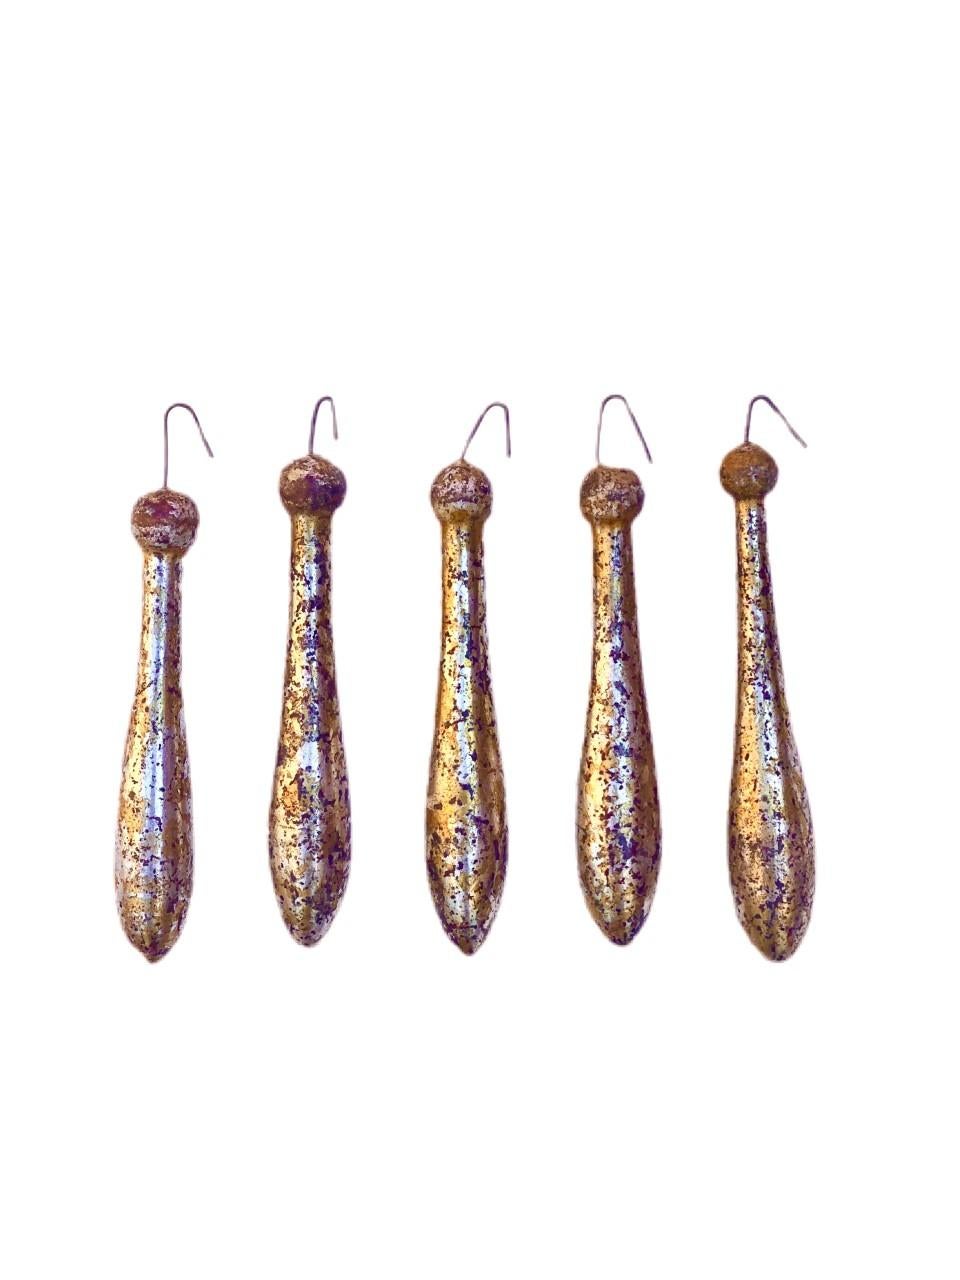 Hand-Carved 18th Century Italian Speckled Gold and Silver Leaf Tassel Ornaments 'Set of 5' For Sale